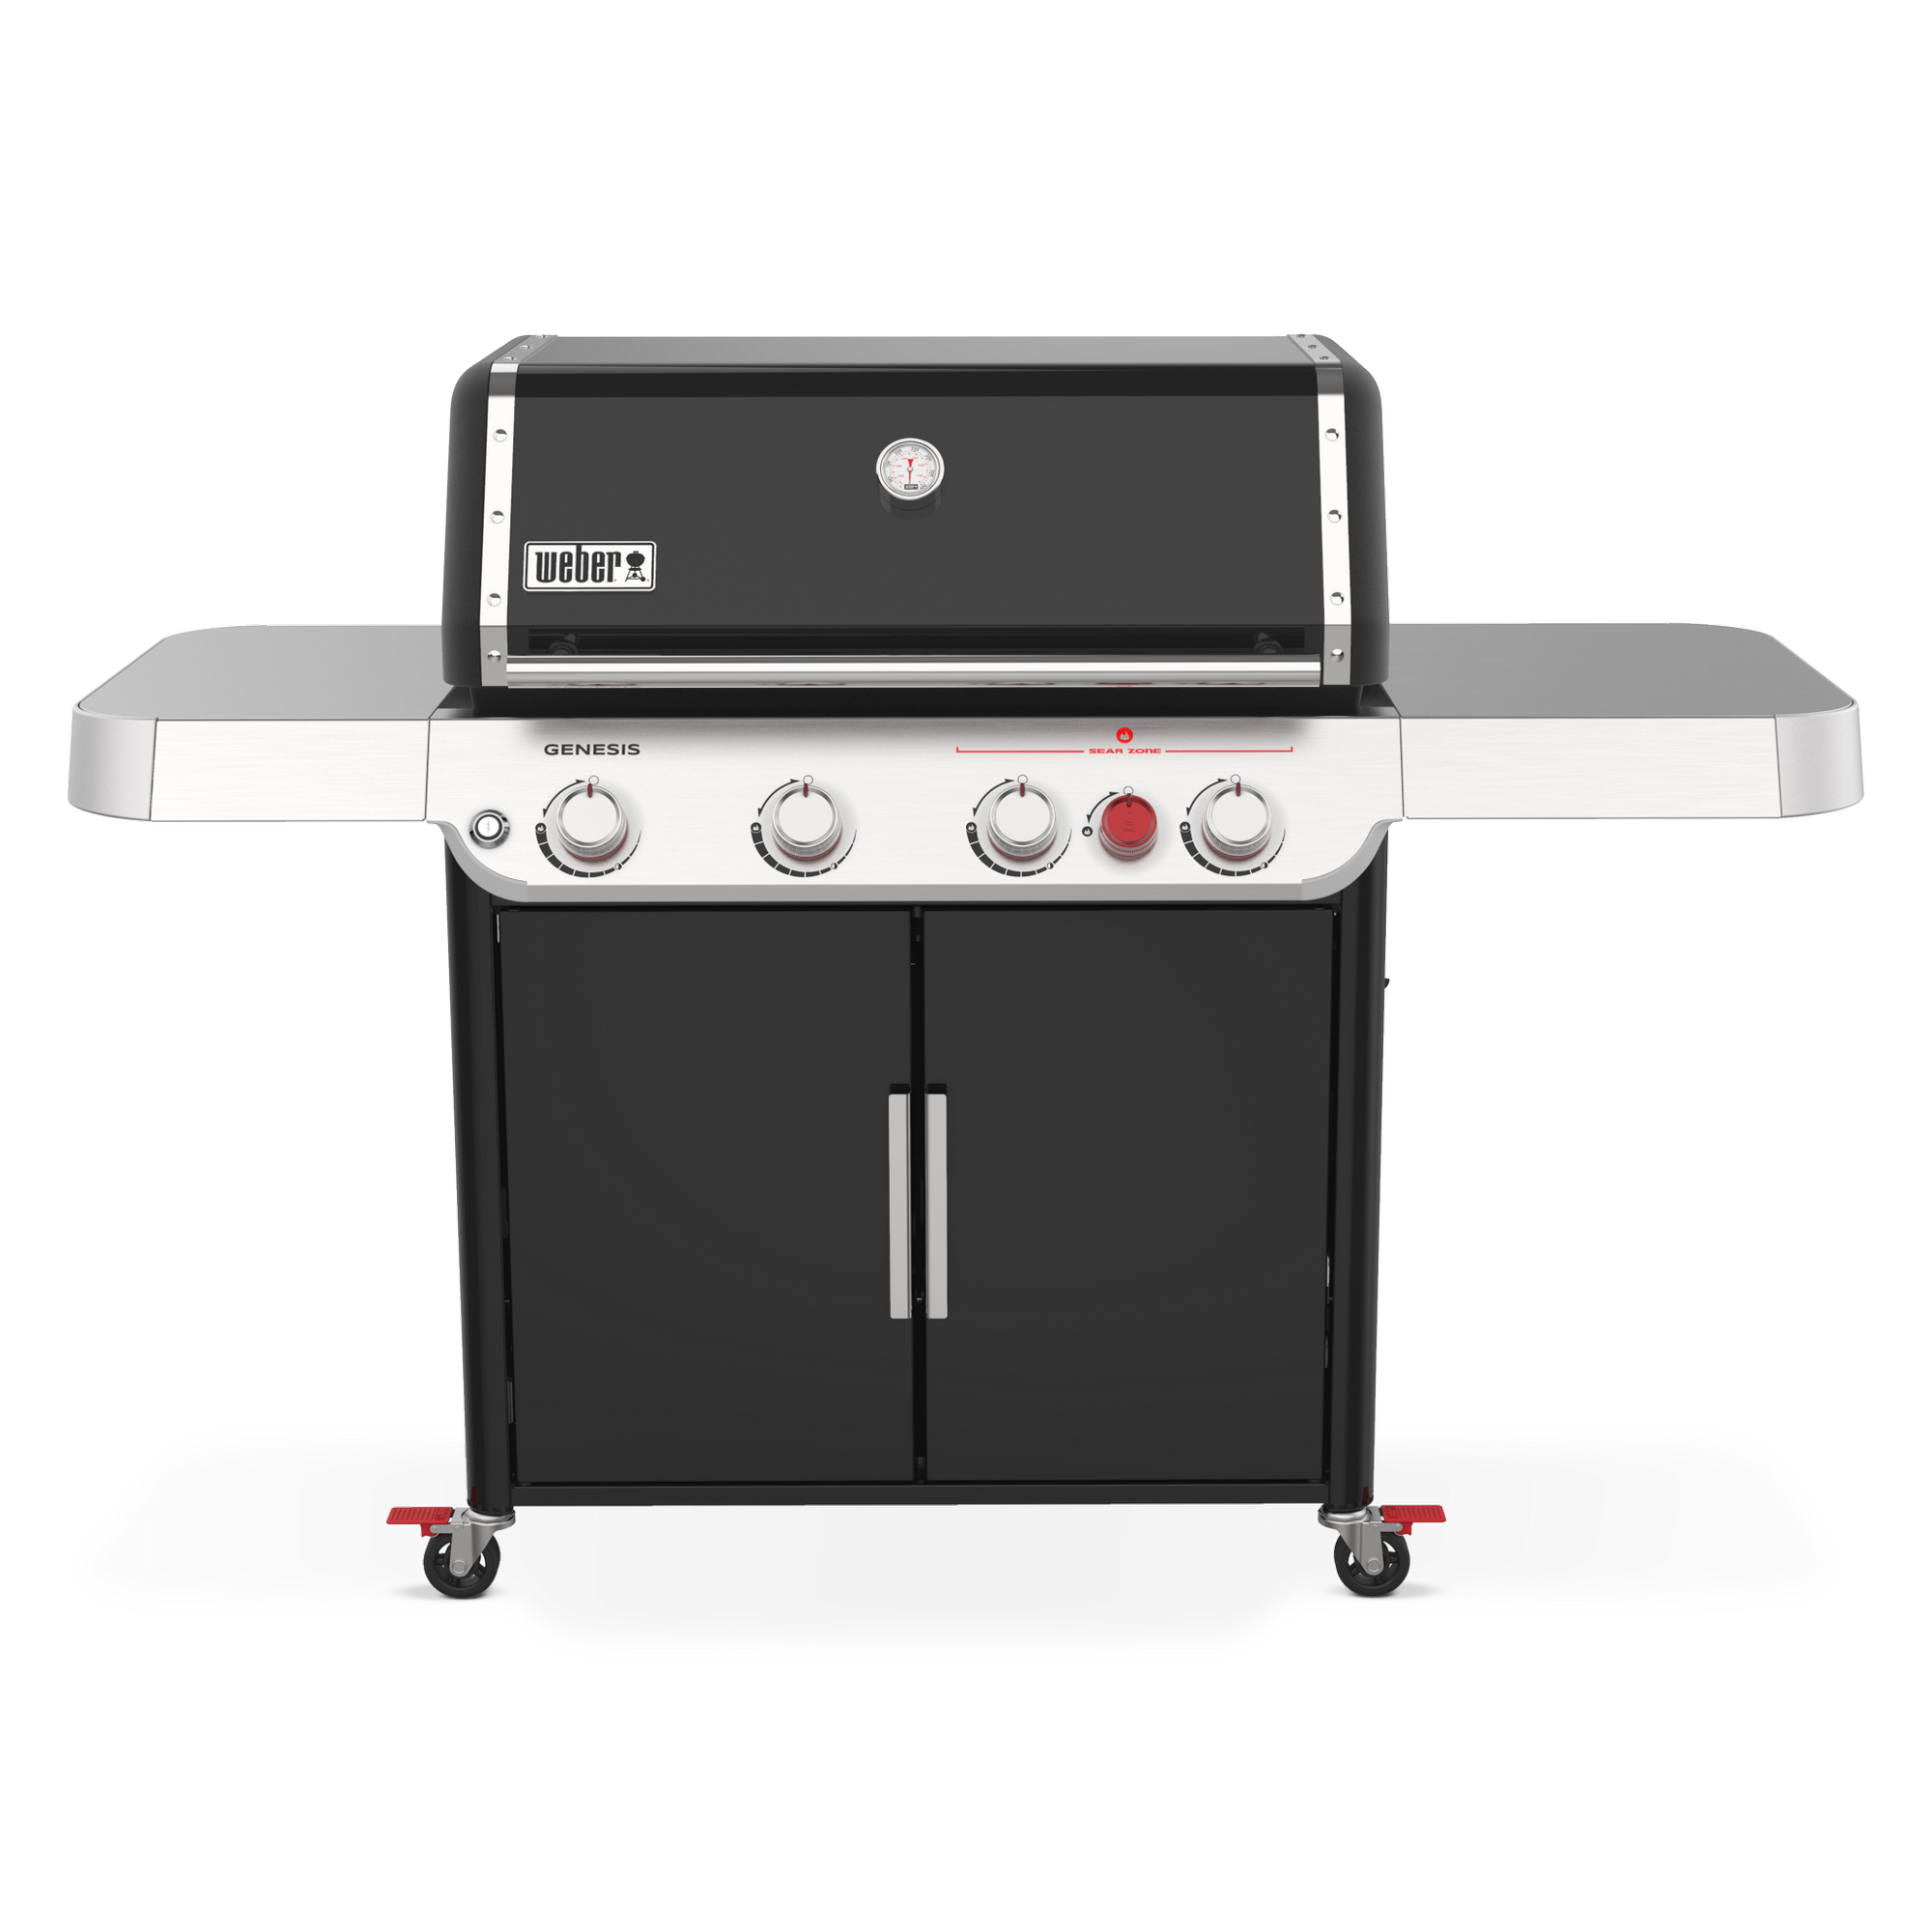 Gasgrill 'Genesis E-425s' schwarz 123,1 x 173,9 x 68,5 cm, 4 Brenner + product picture